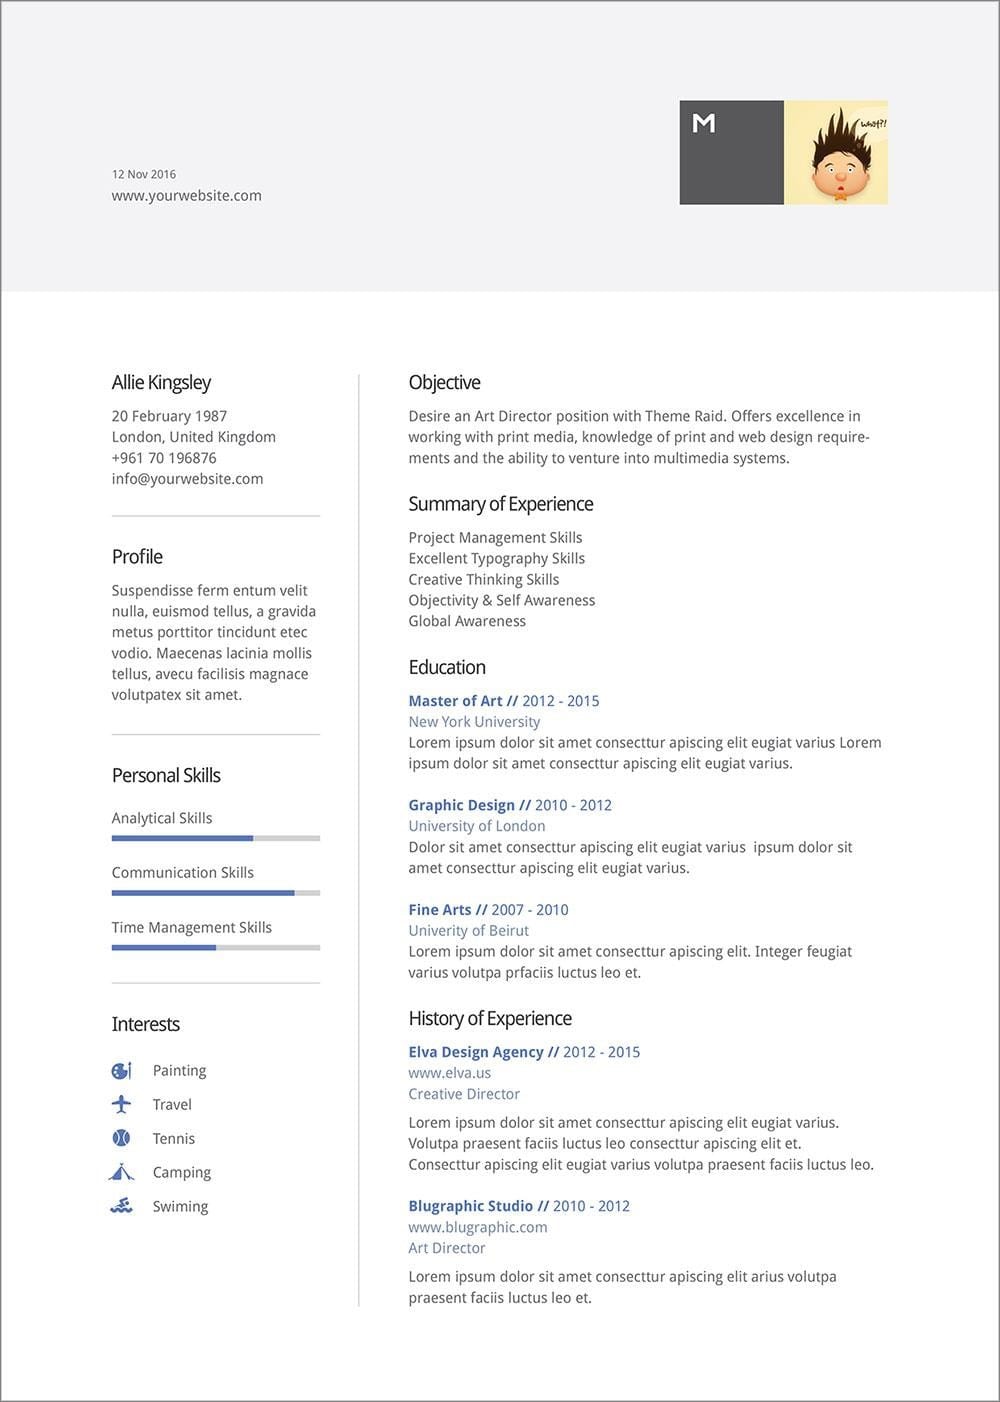 Resume 2016 Template from cdn-images.zety.com